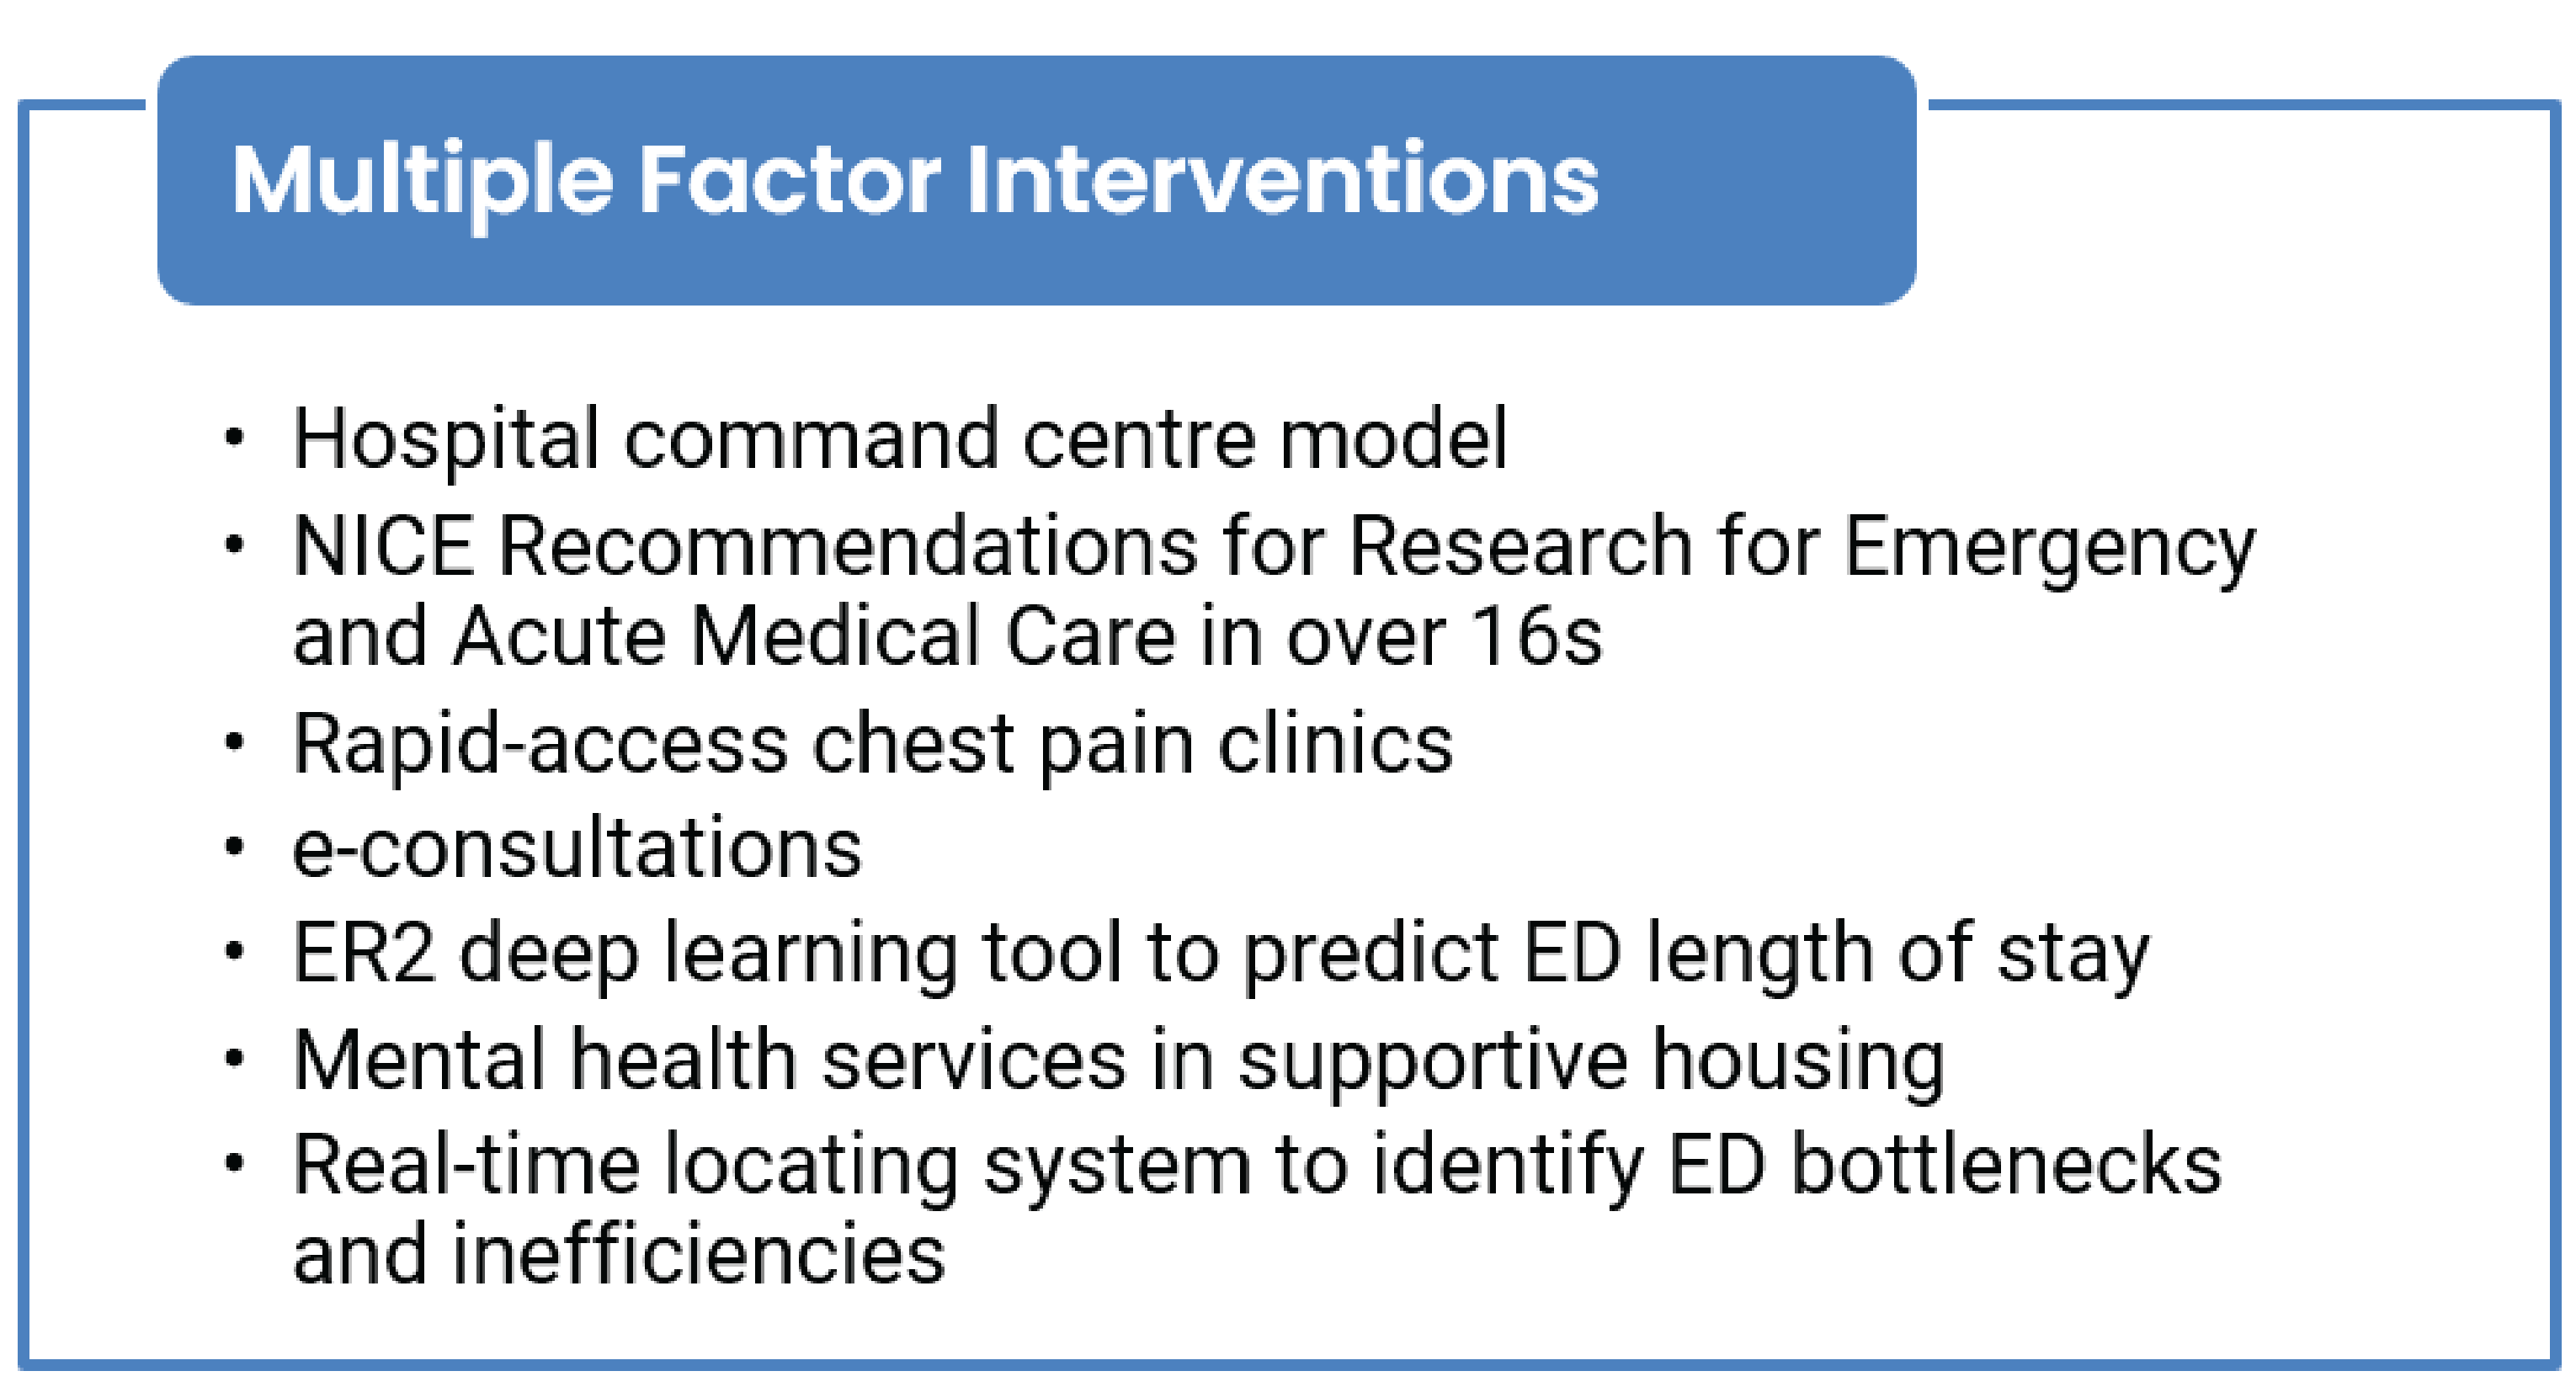 A stylized text box containing a list of new and emerging interventions intended to address multiple factors contributing to ED overcrowding. Box 1 is Multiple Factor Interventions and includes hospital command centre model, NICE Recommendations for Research for Emergency and Acute Medical Care in over 16s, rapid-access chest pain clinics, e-consultations, ER2 deep learning tool to predict ED length of stay, mental health services in supportive housing, and real-time locating system to identify ED bottlenecks and inefficiencies.